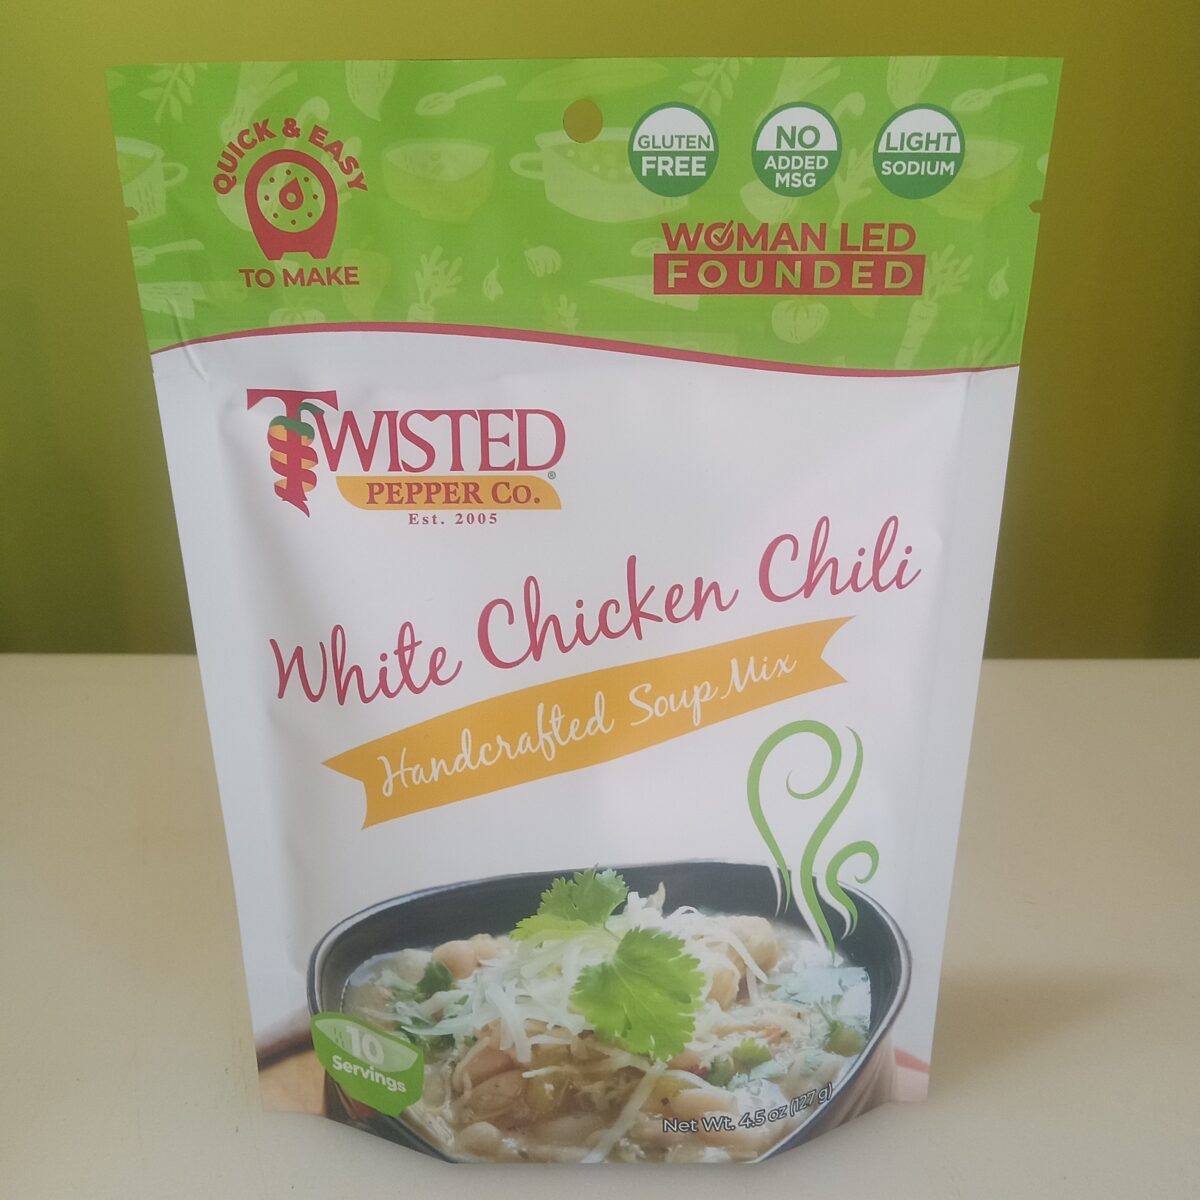 White Chicken Chili Soup Mix- Twisted Pepper